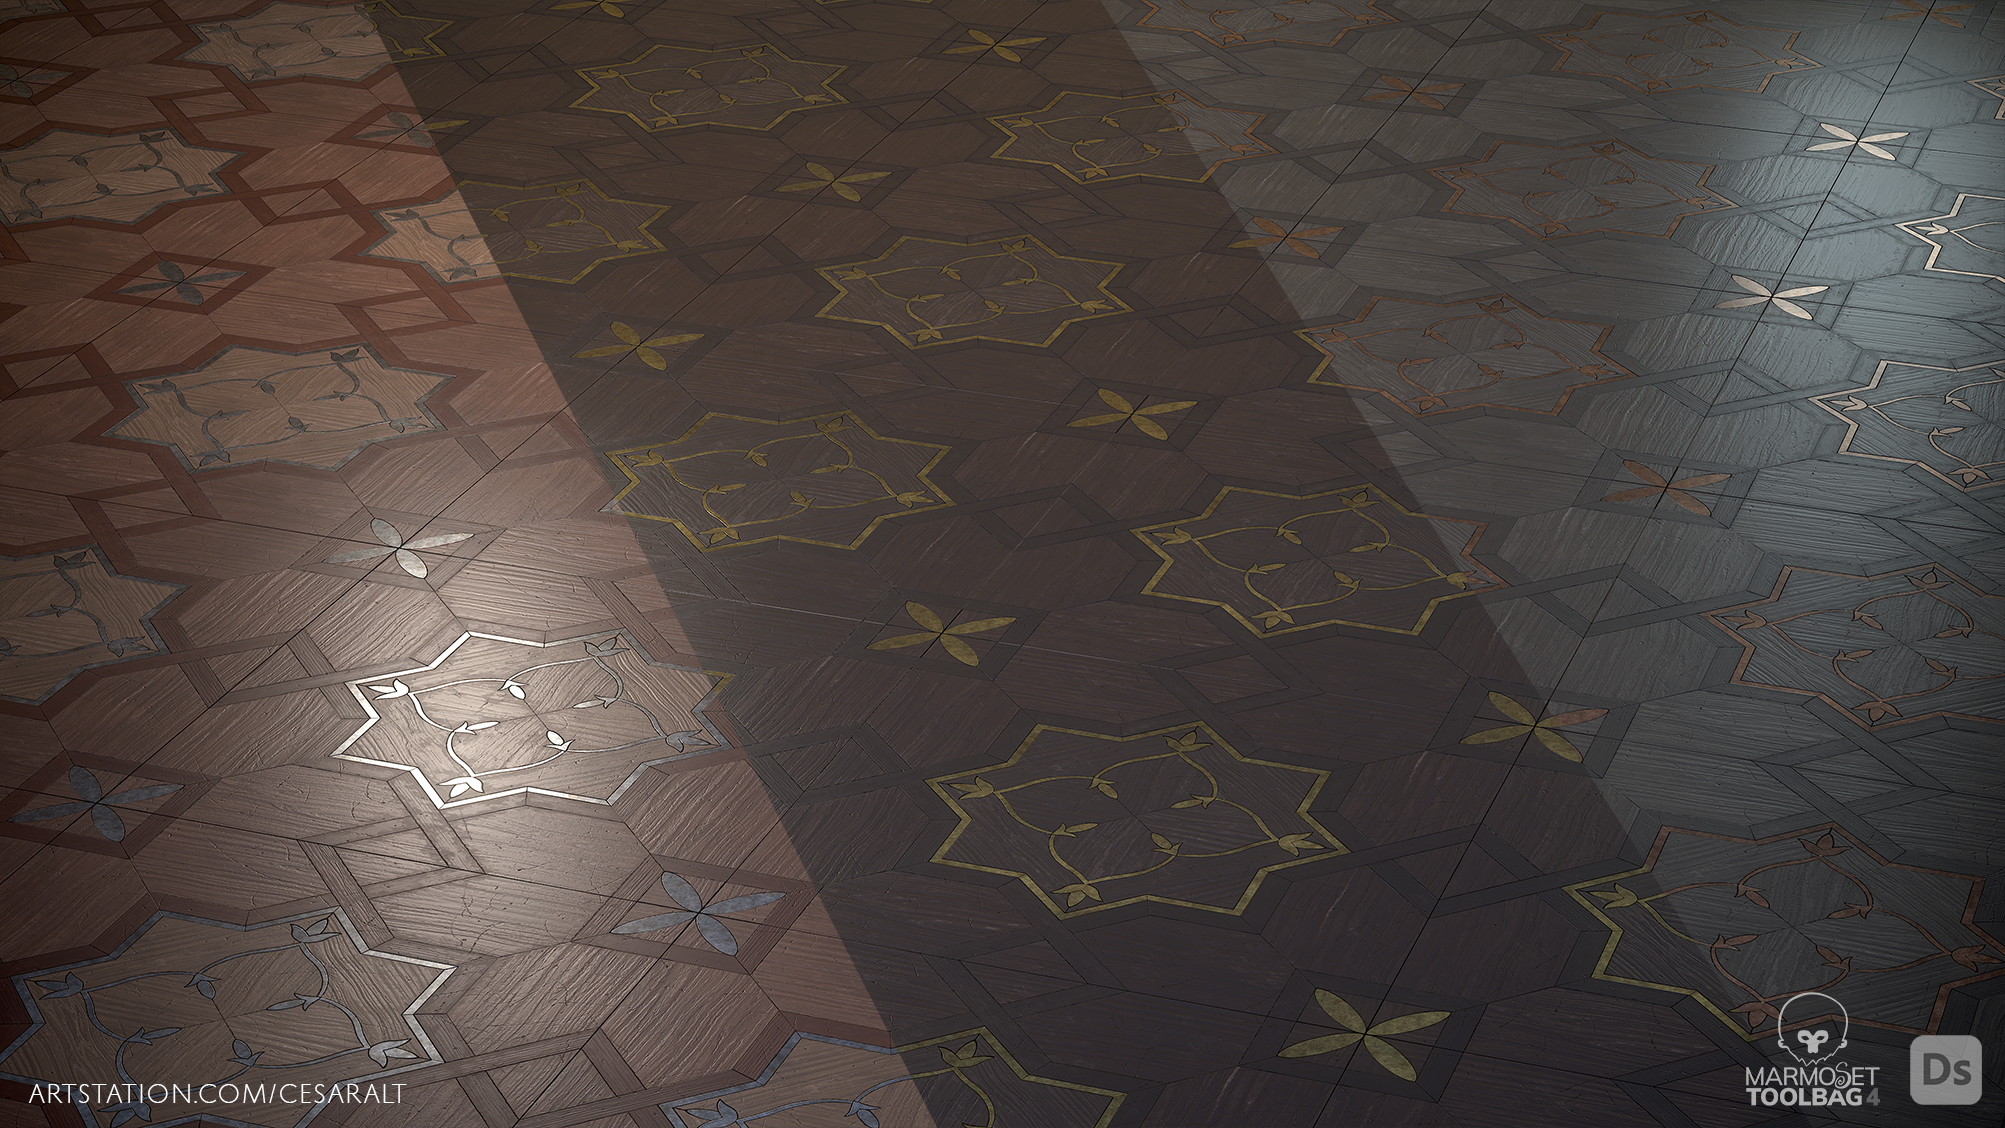 Some of the color variations possible with exposed parameters in Substance Designer.